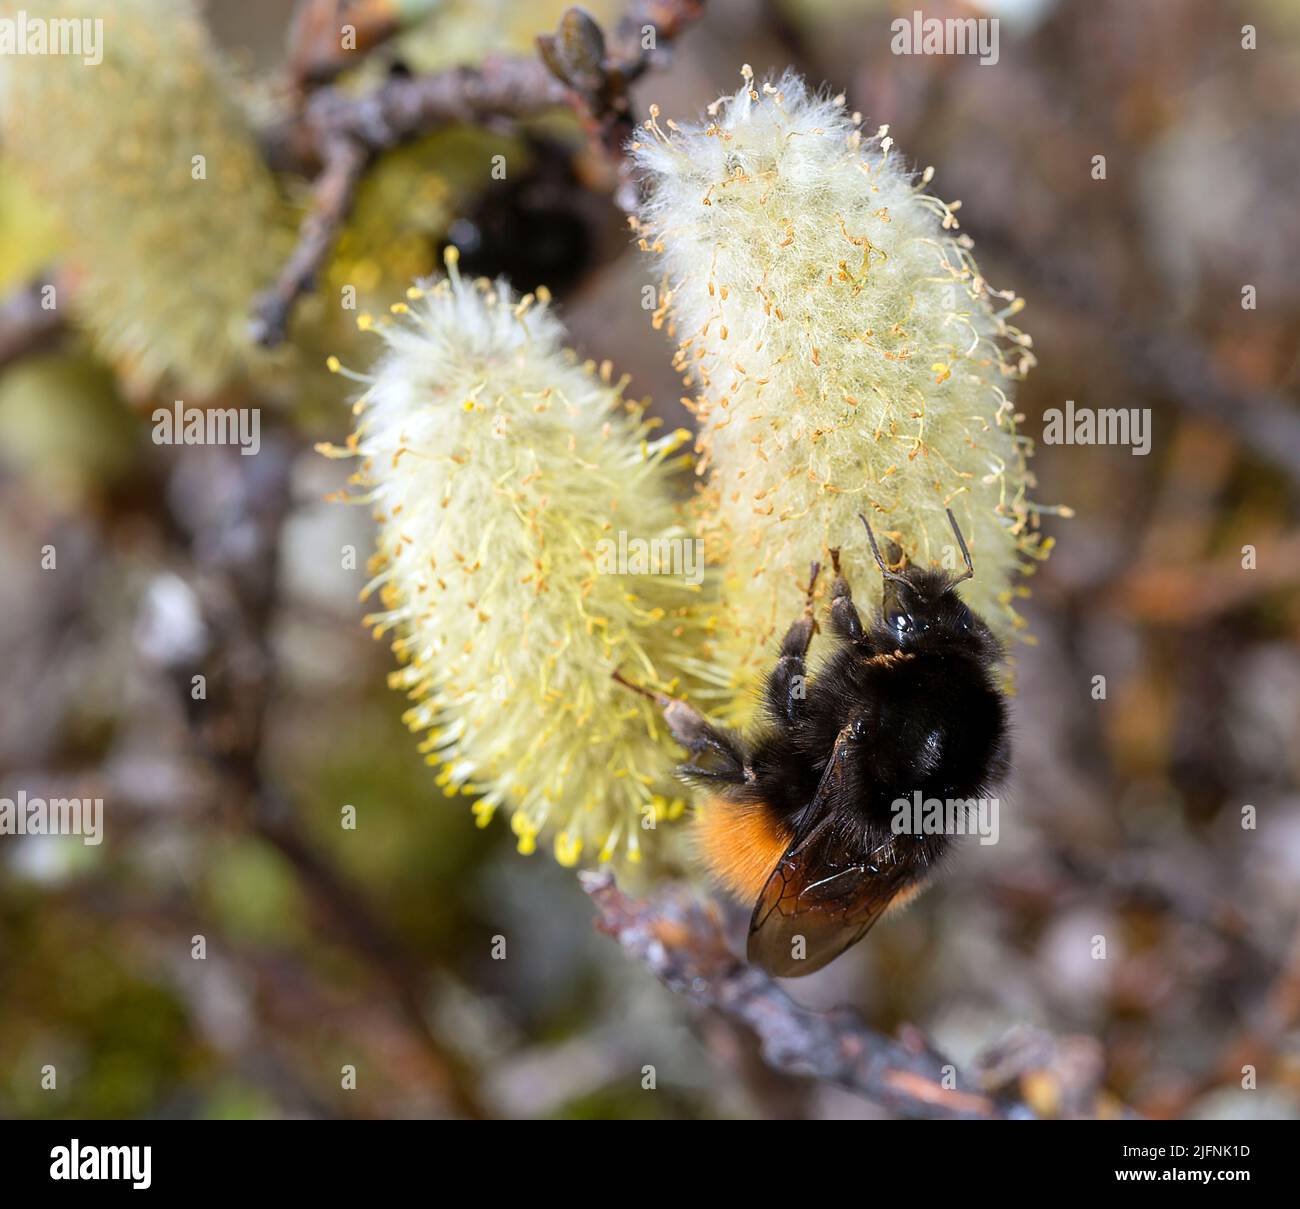 Quee of the bumblebee (Bombus lapponicus scandinavicus) with parasitic mites feeding on male Willov flower at Dyranut, Hardangervidda southern Norway Stock Photo